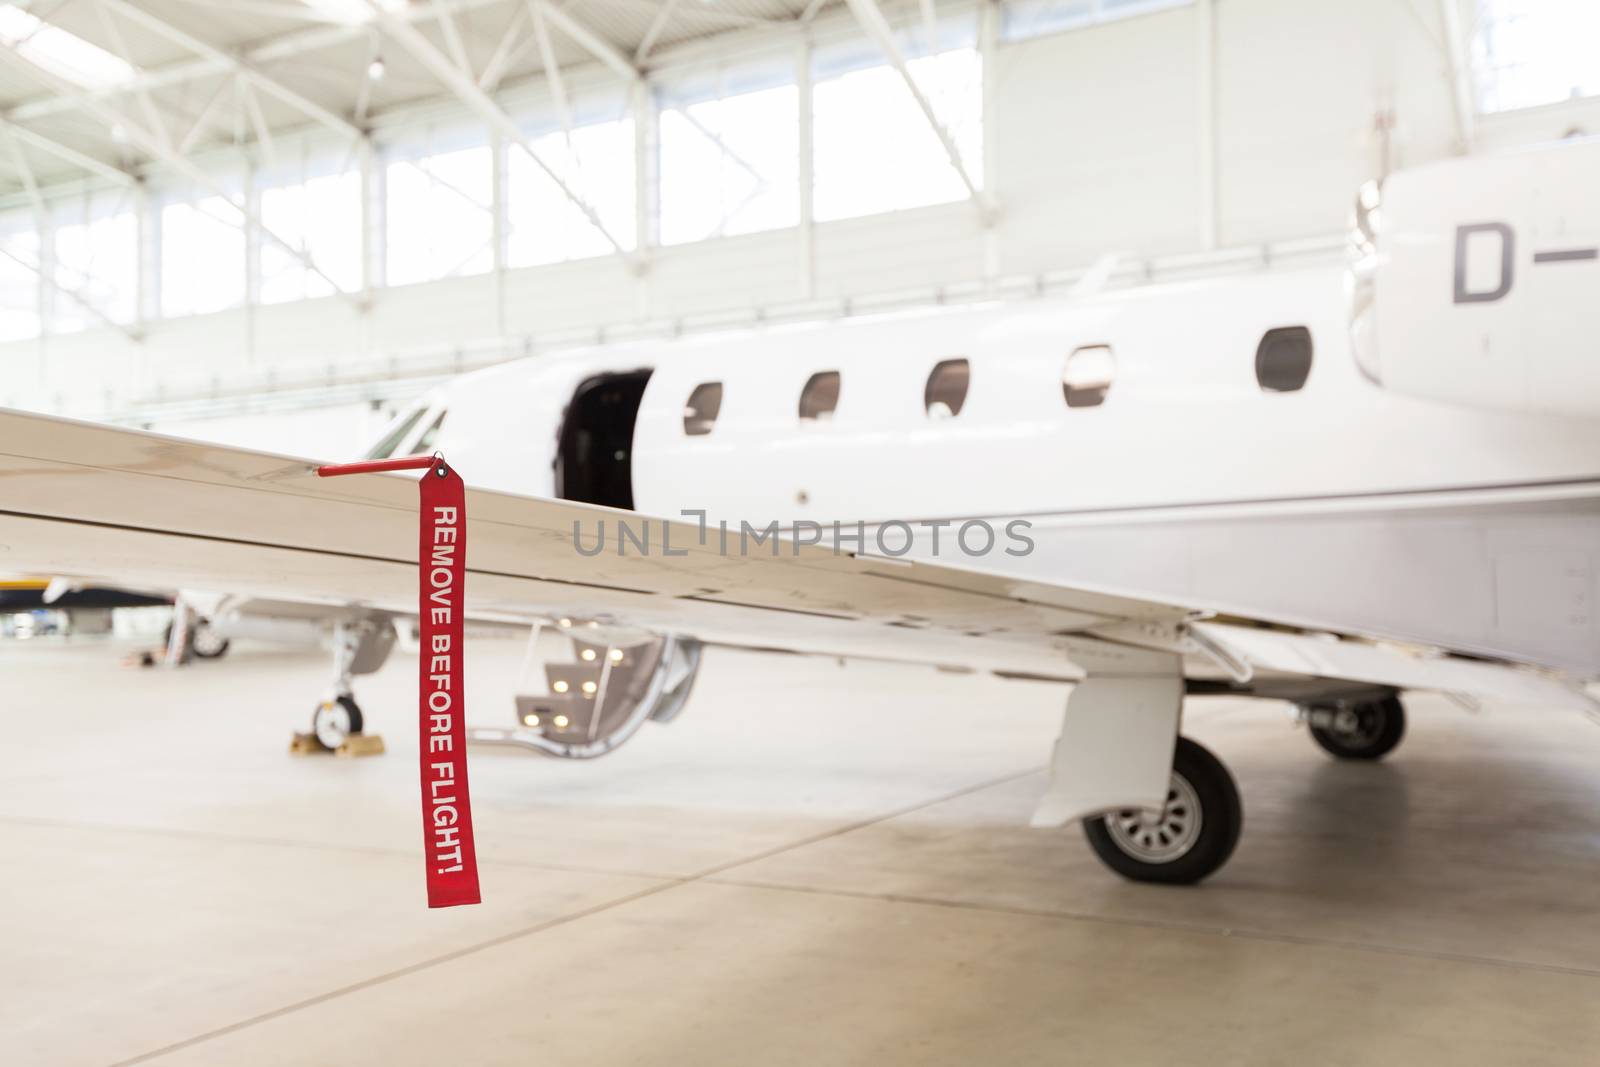 Airplane in Hangar with remove before flight Labels in red by juniart